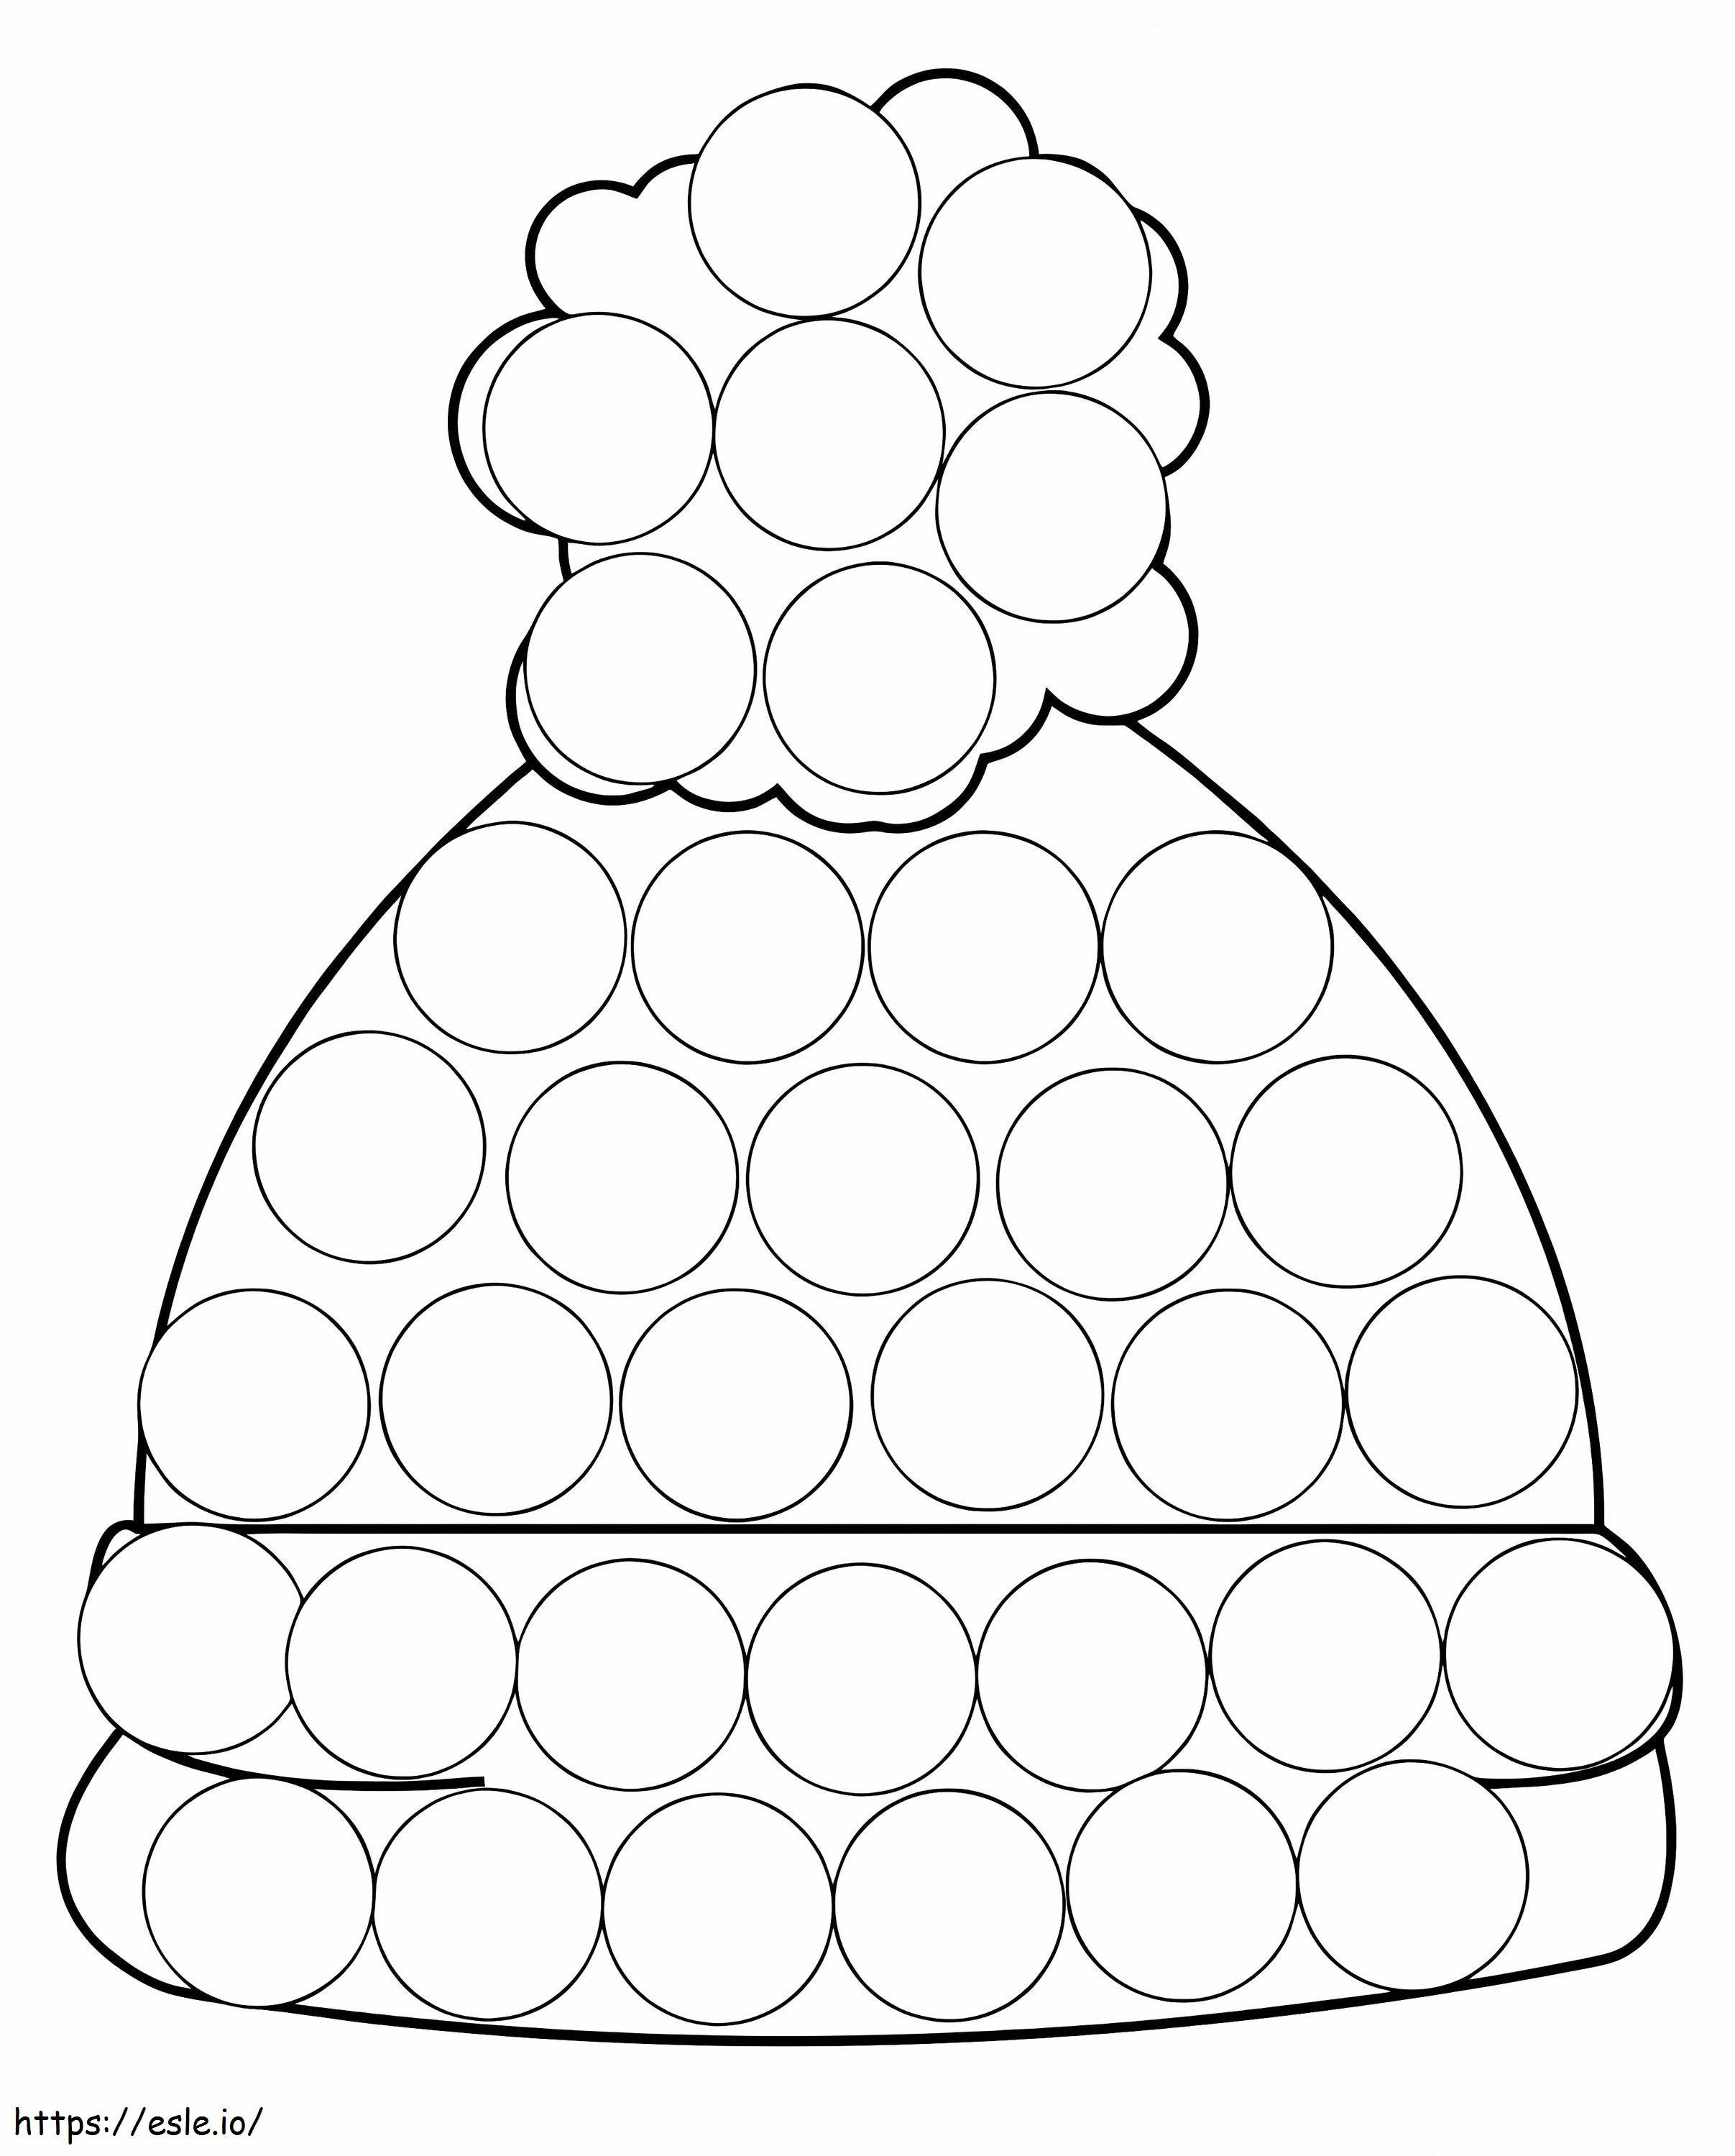 Beanie Dot Marker coloring page